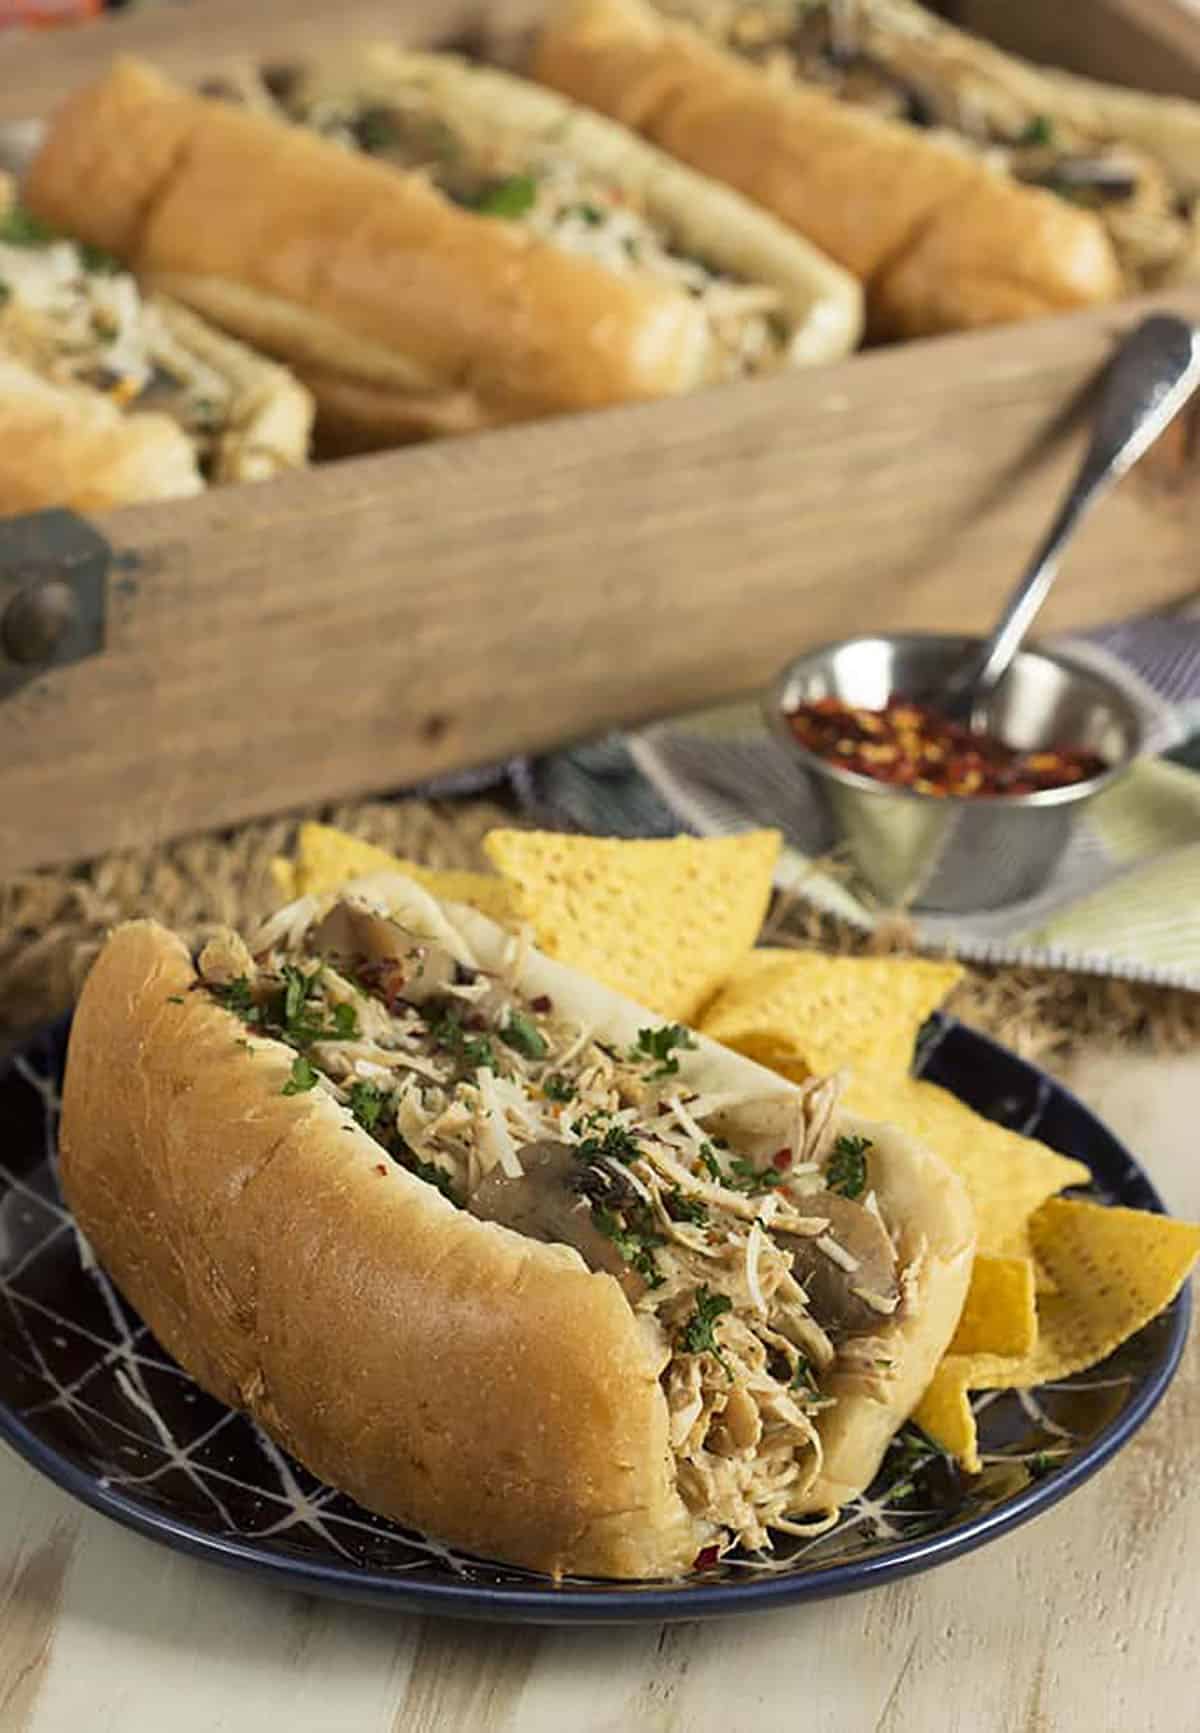 Chicken cheesesteak on a blue plate with tortilla chips.